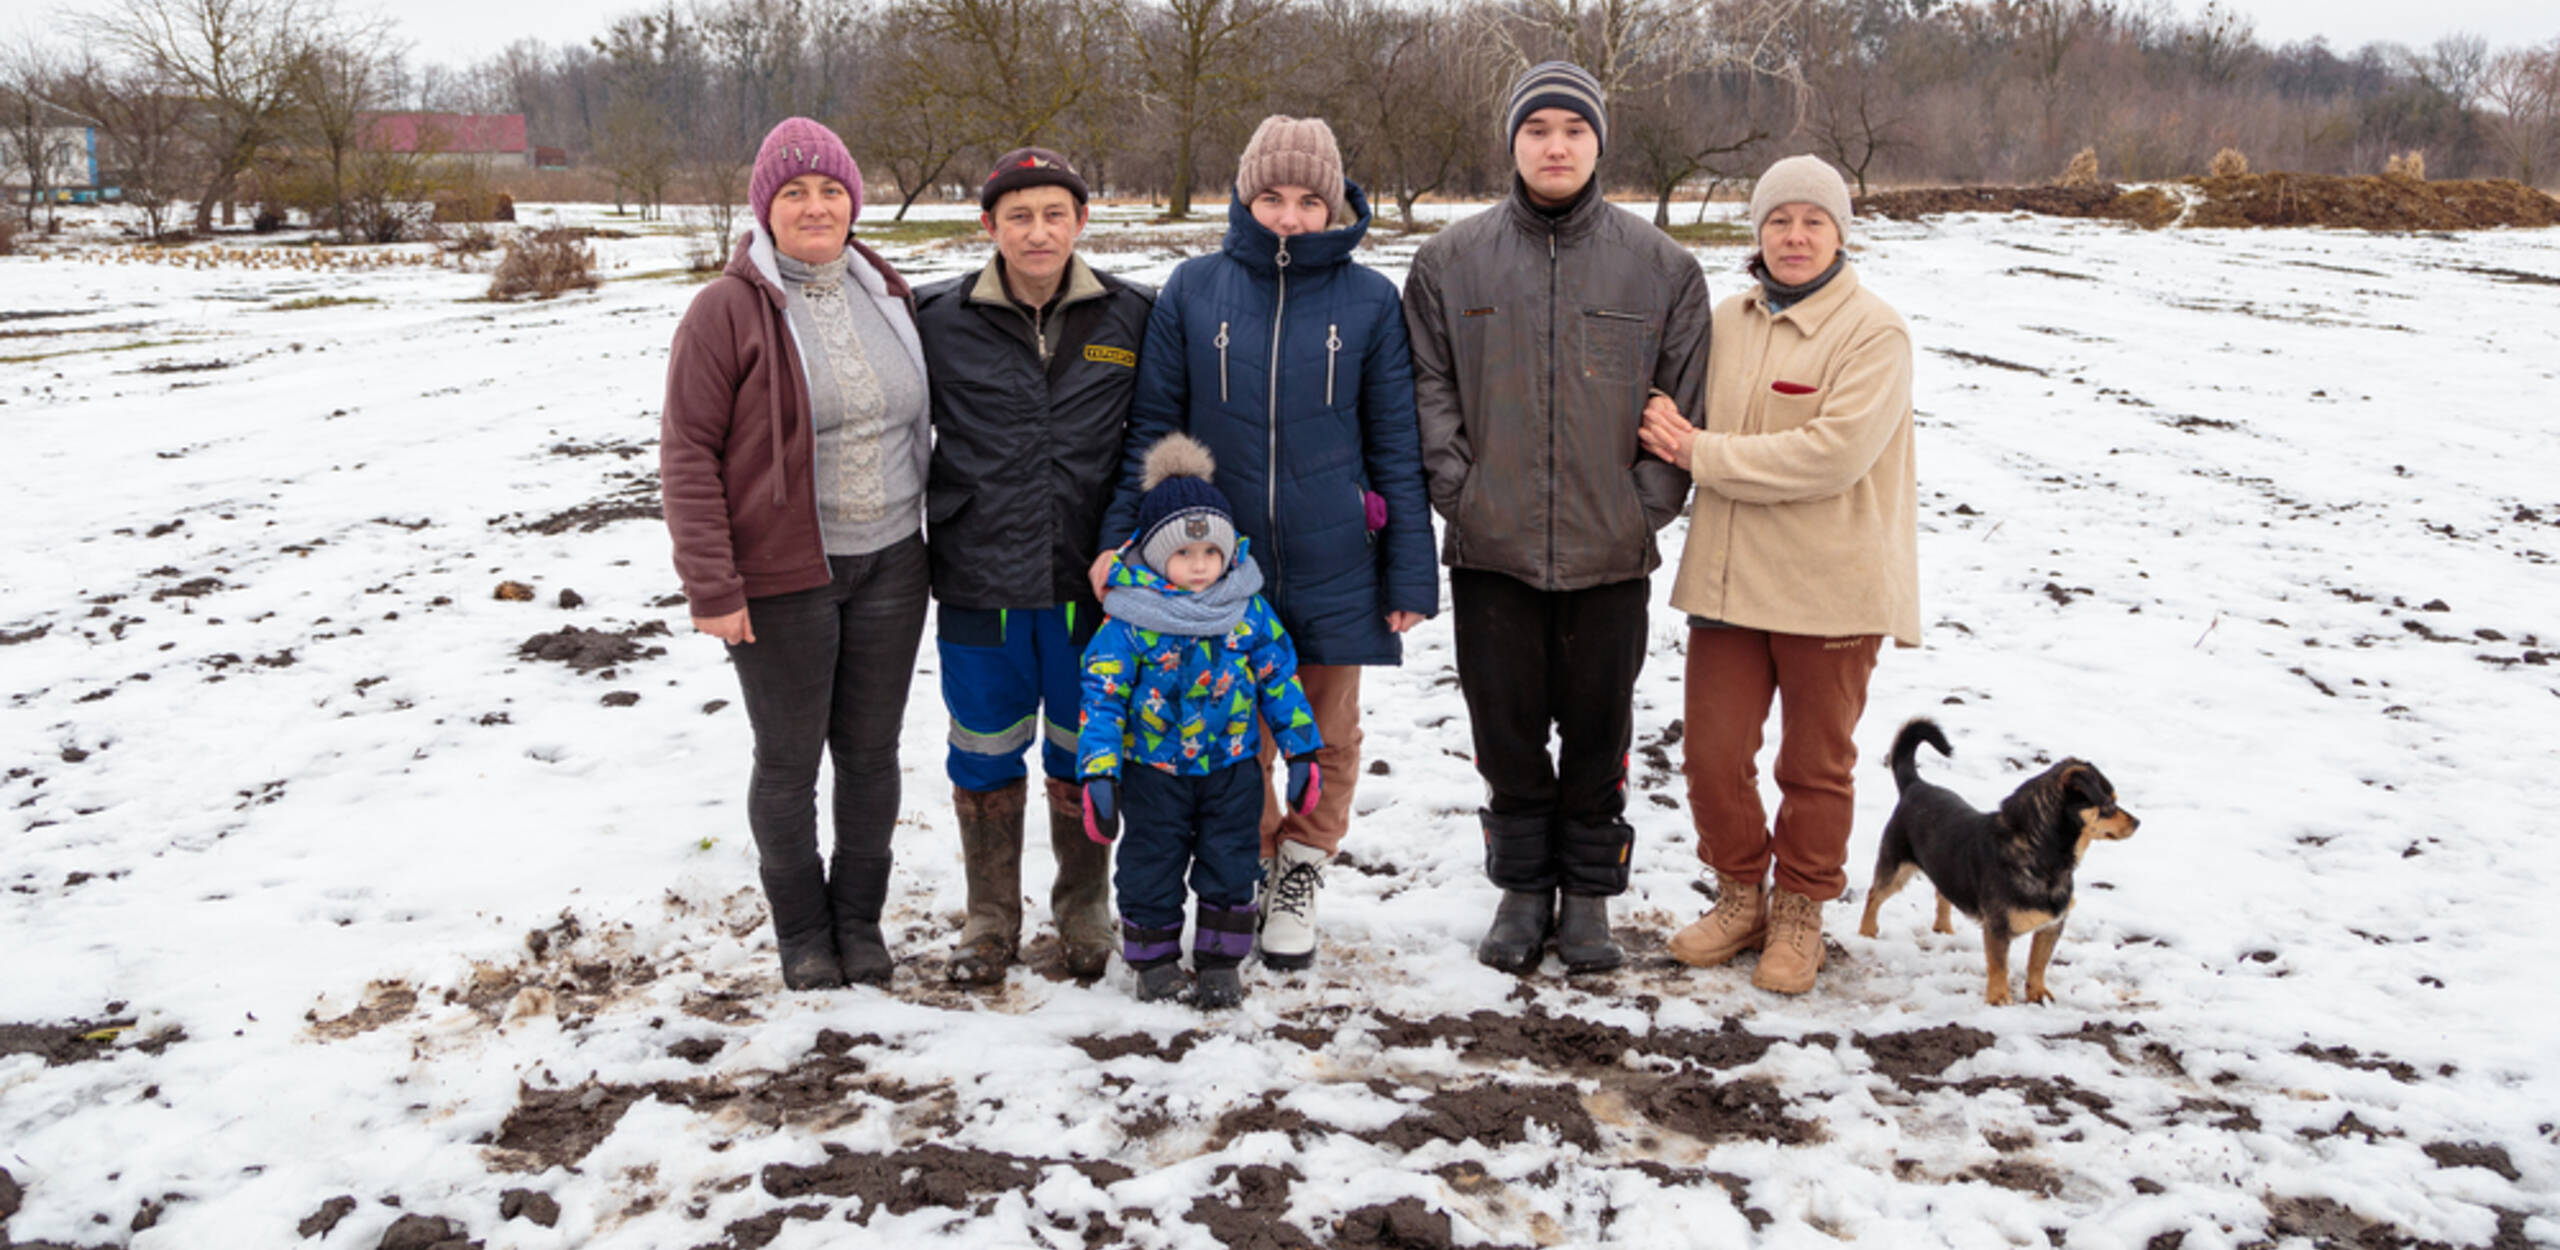 Olena (1st from r.) and her family fled from the Ukrainian war zone. Caritas helped them start a new life.